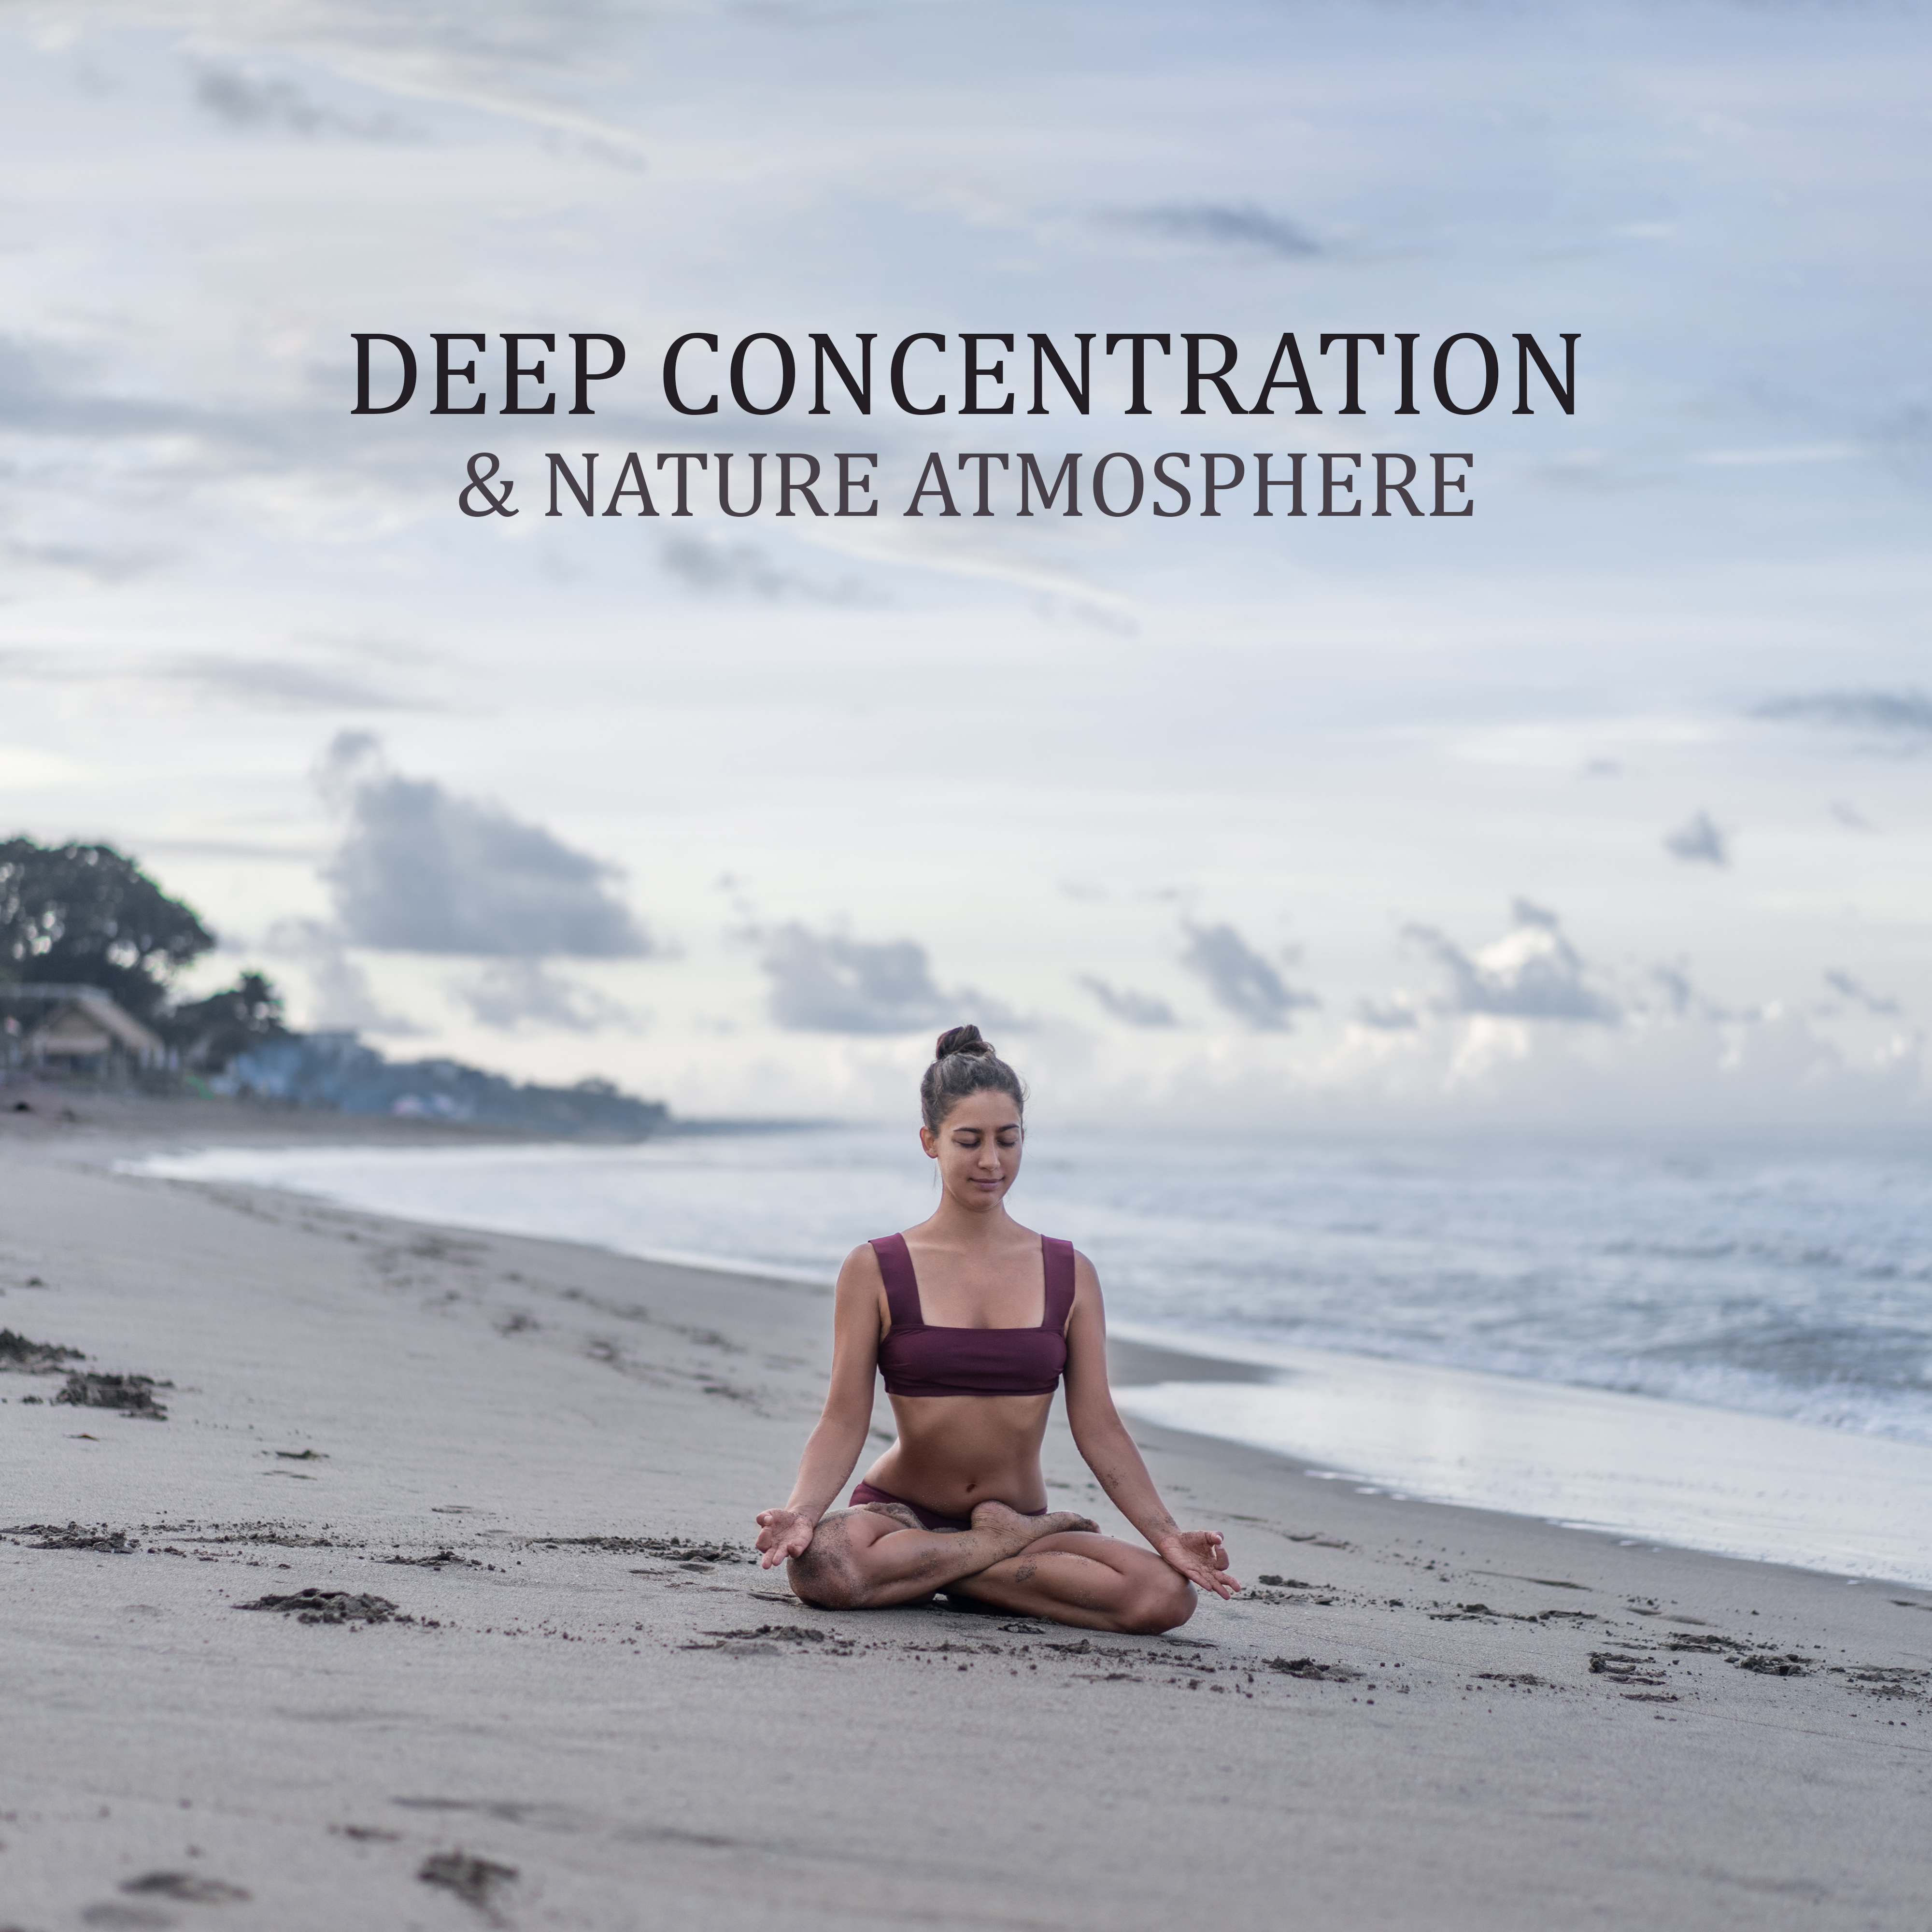 Deep Concentration & Nature Atmosphere: New Age Yoga & Meditation Music Compilation